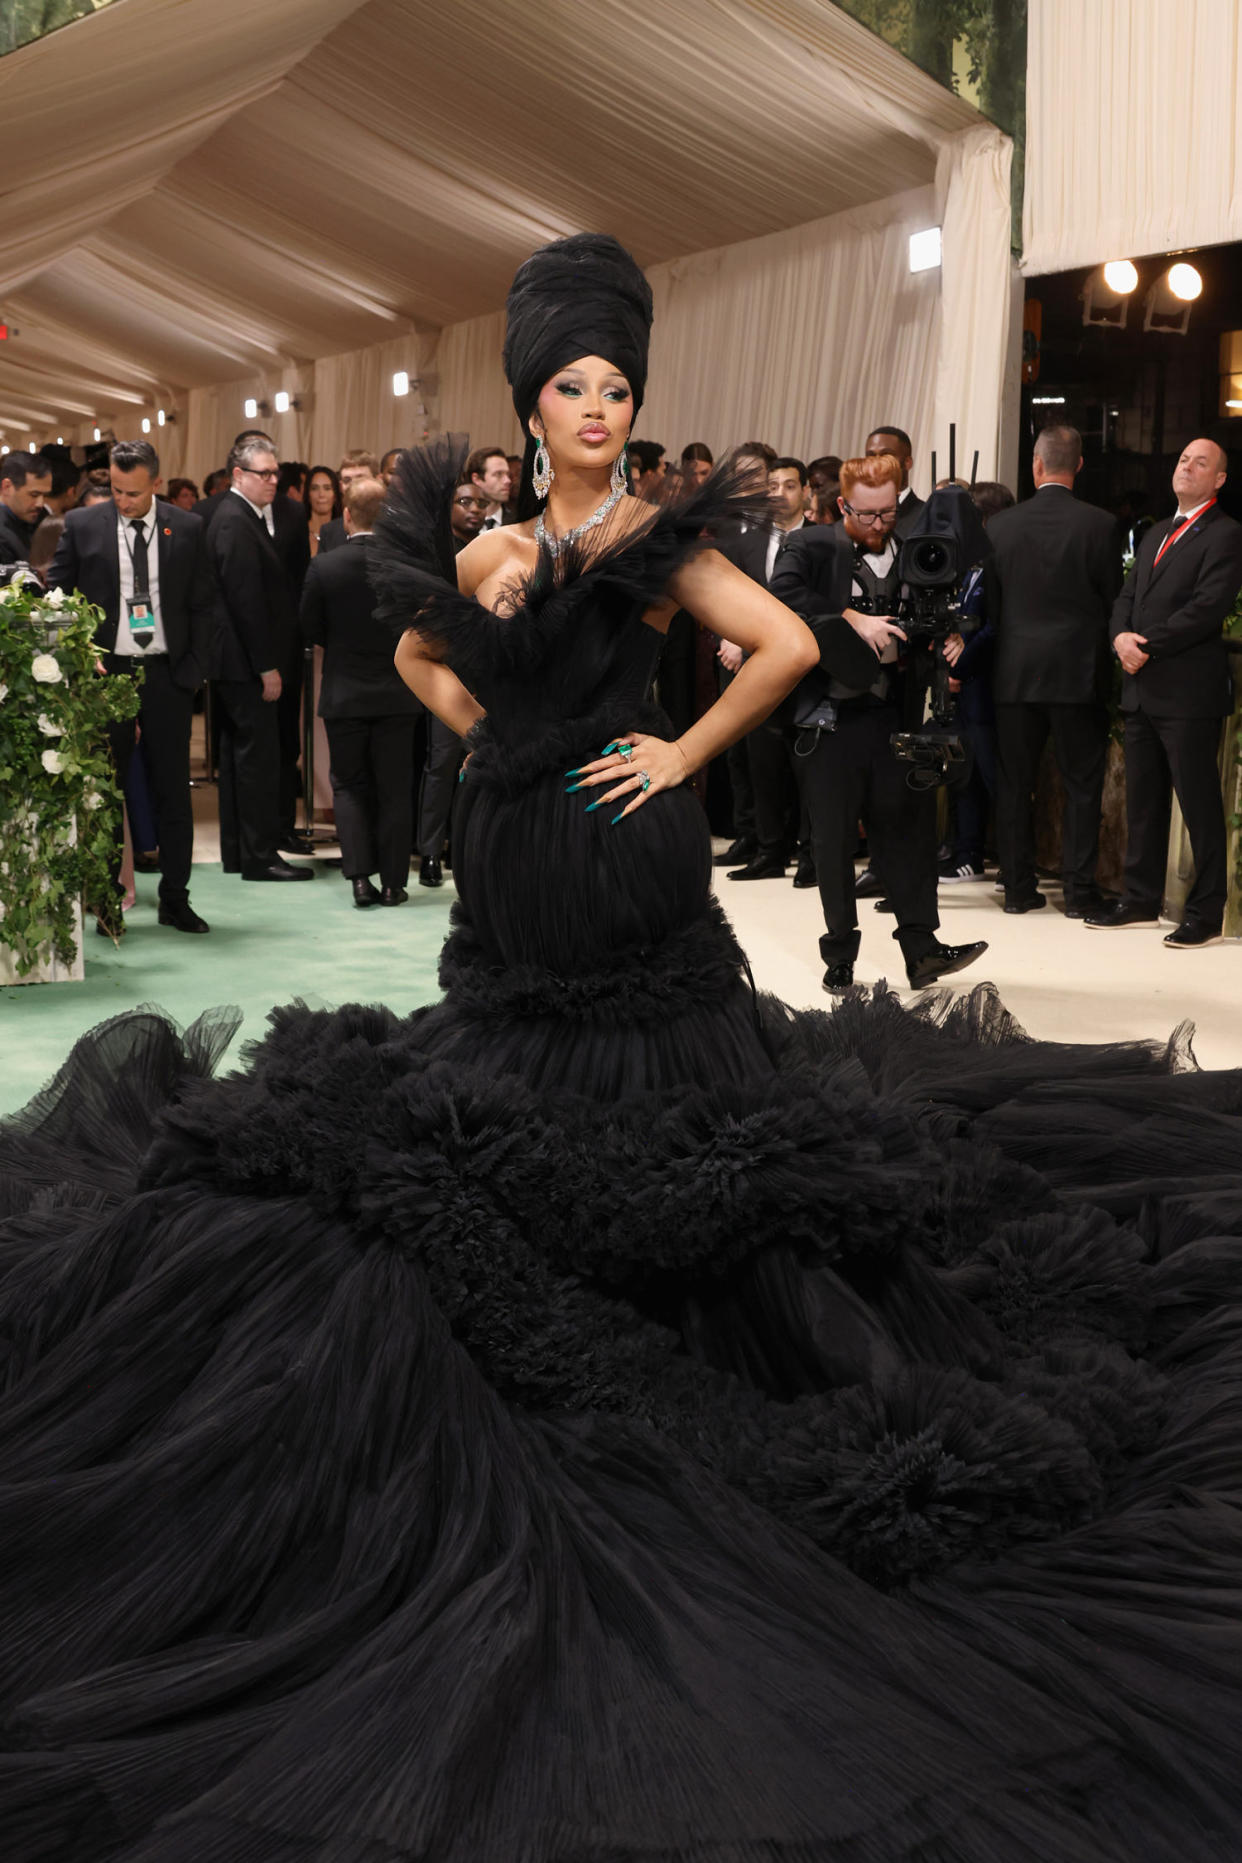 Cardi B is understated in all black yet maximalist in size and height. We love. (John Shearer / WireImage)